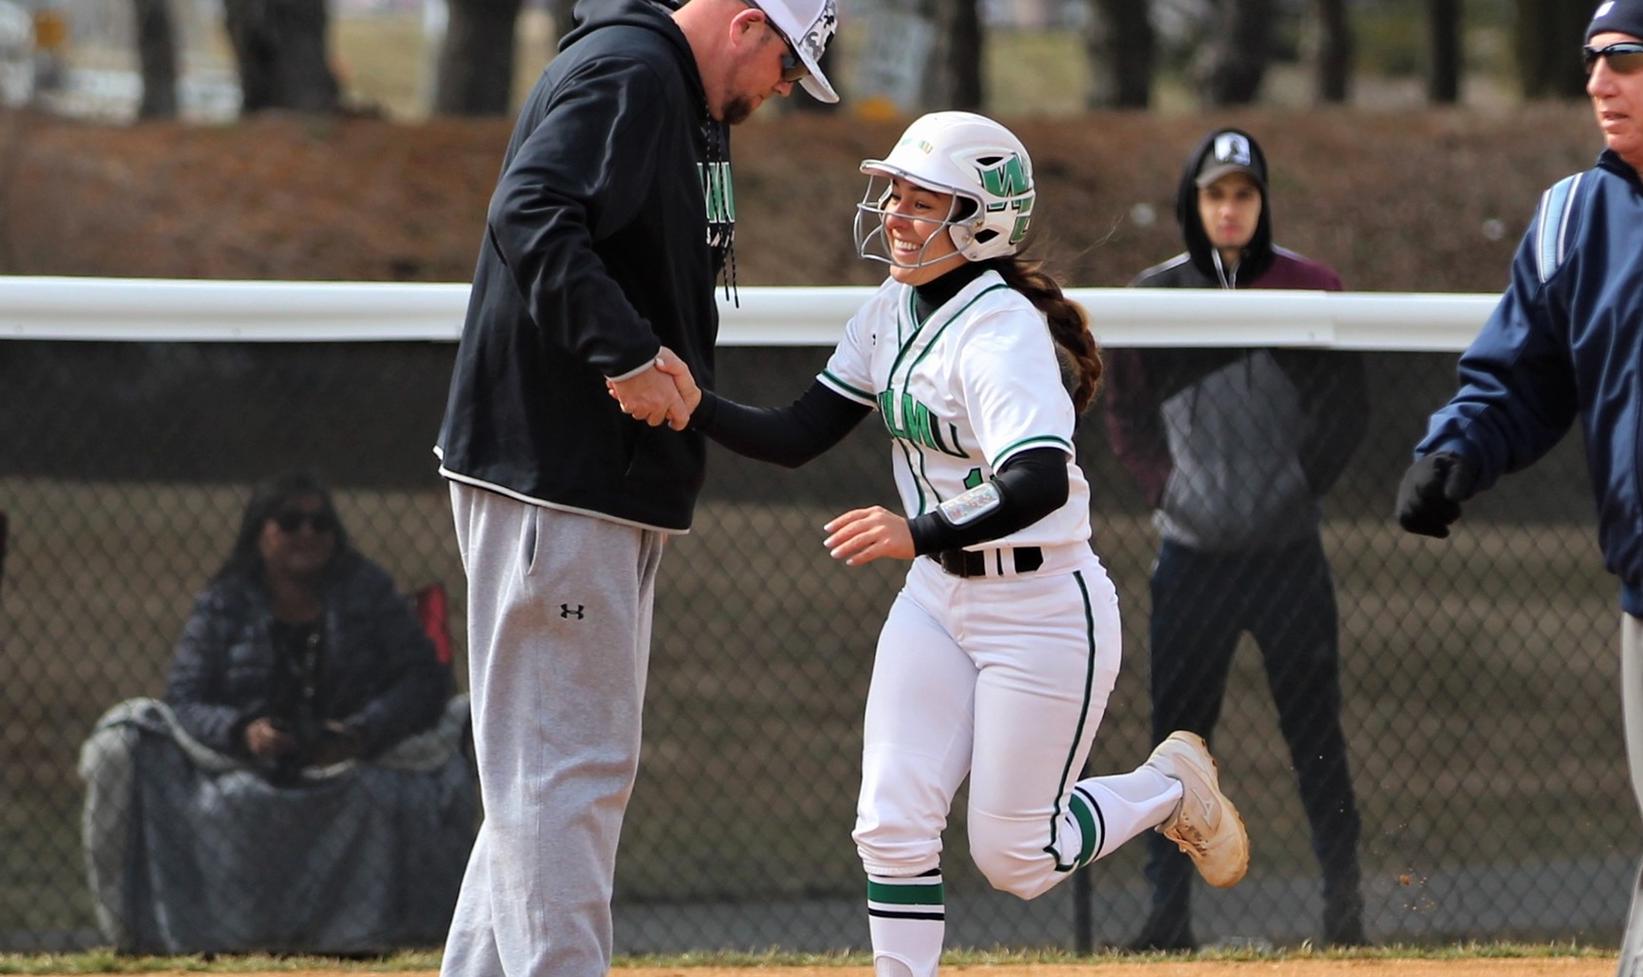 Copyright 2019; Wilmington University. All rights reserved. Photo of Annie Davila greeting assistant coach Rich Groff after one of her two home runs on Wednesday. Photos by Keara McCarthy. March 13, 2019 vs. Shippensburg.